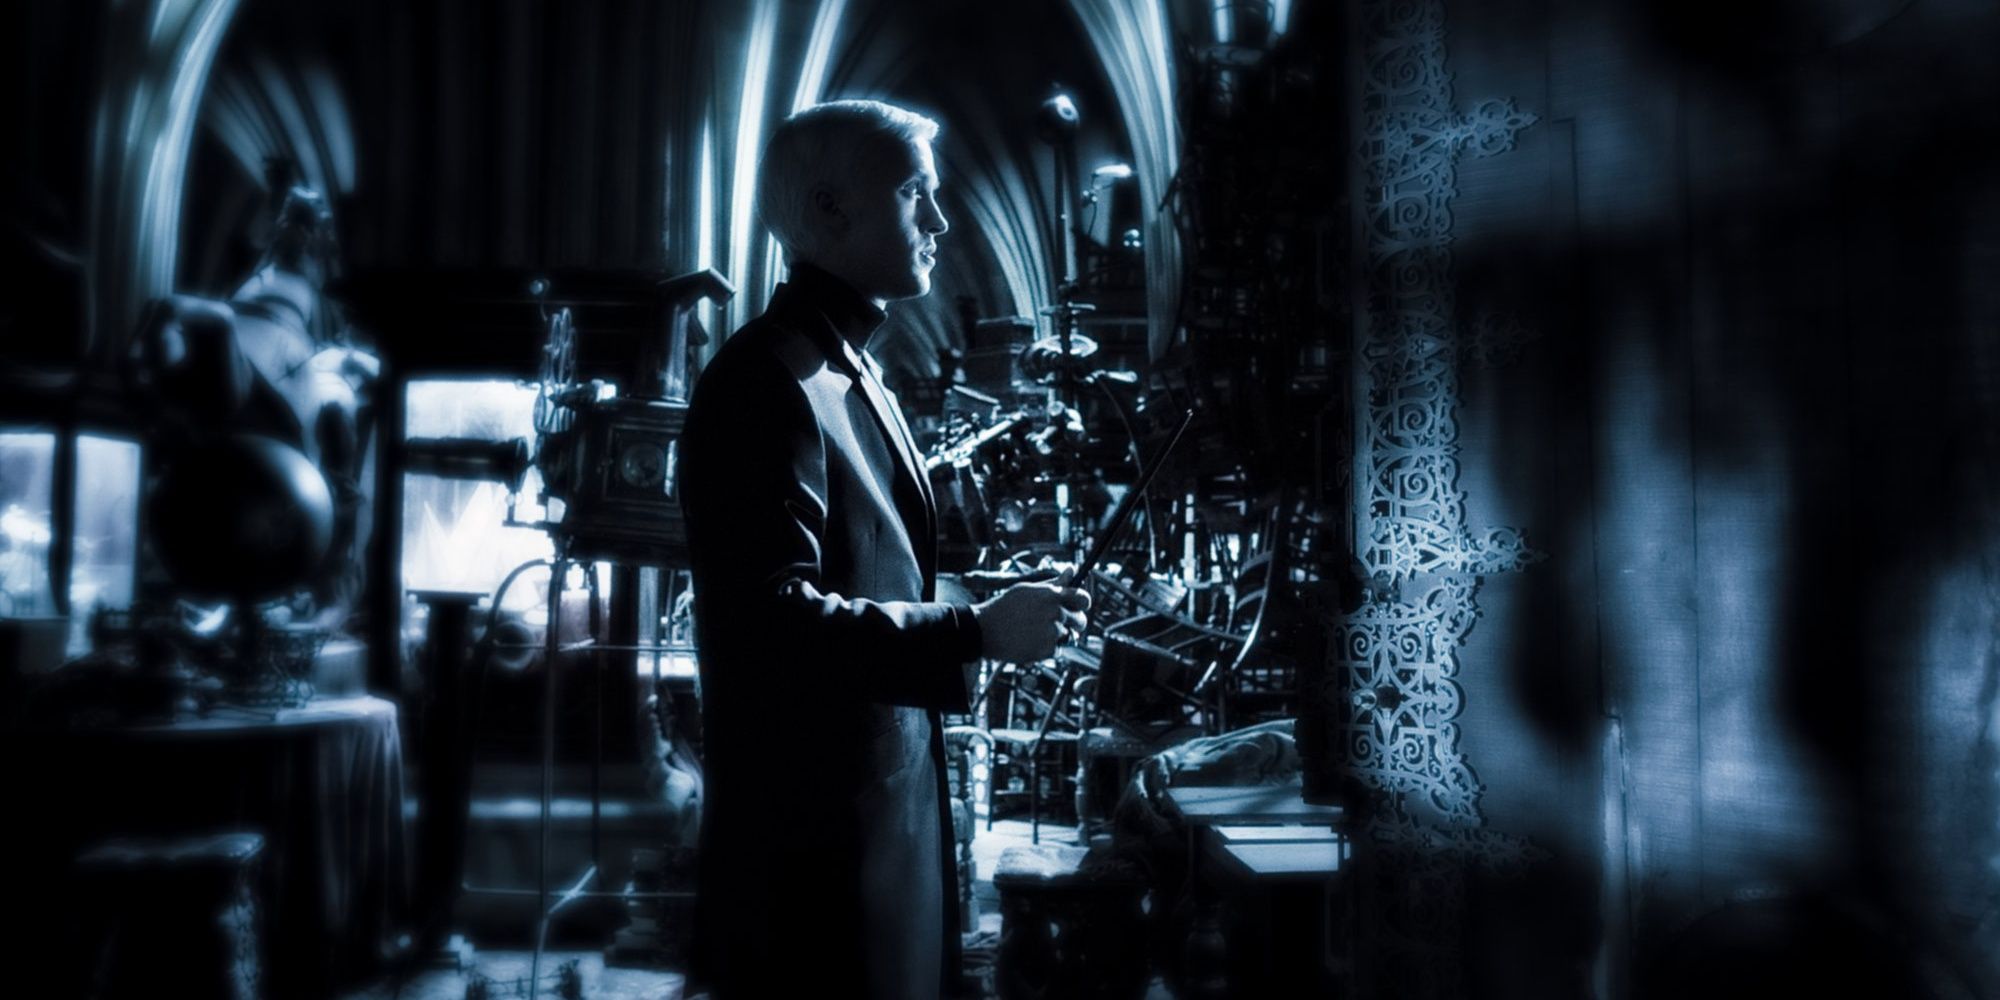 Draco Malfoy stands outside the Vanishing Cabinet at Borgin and Burkes in Harry Potter